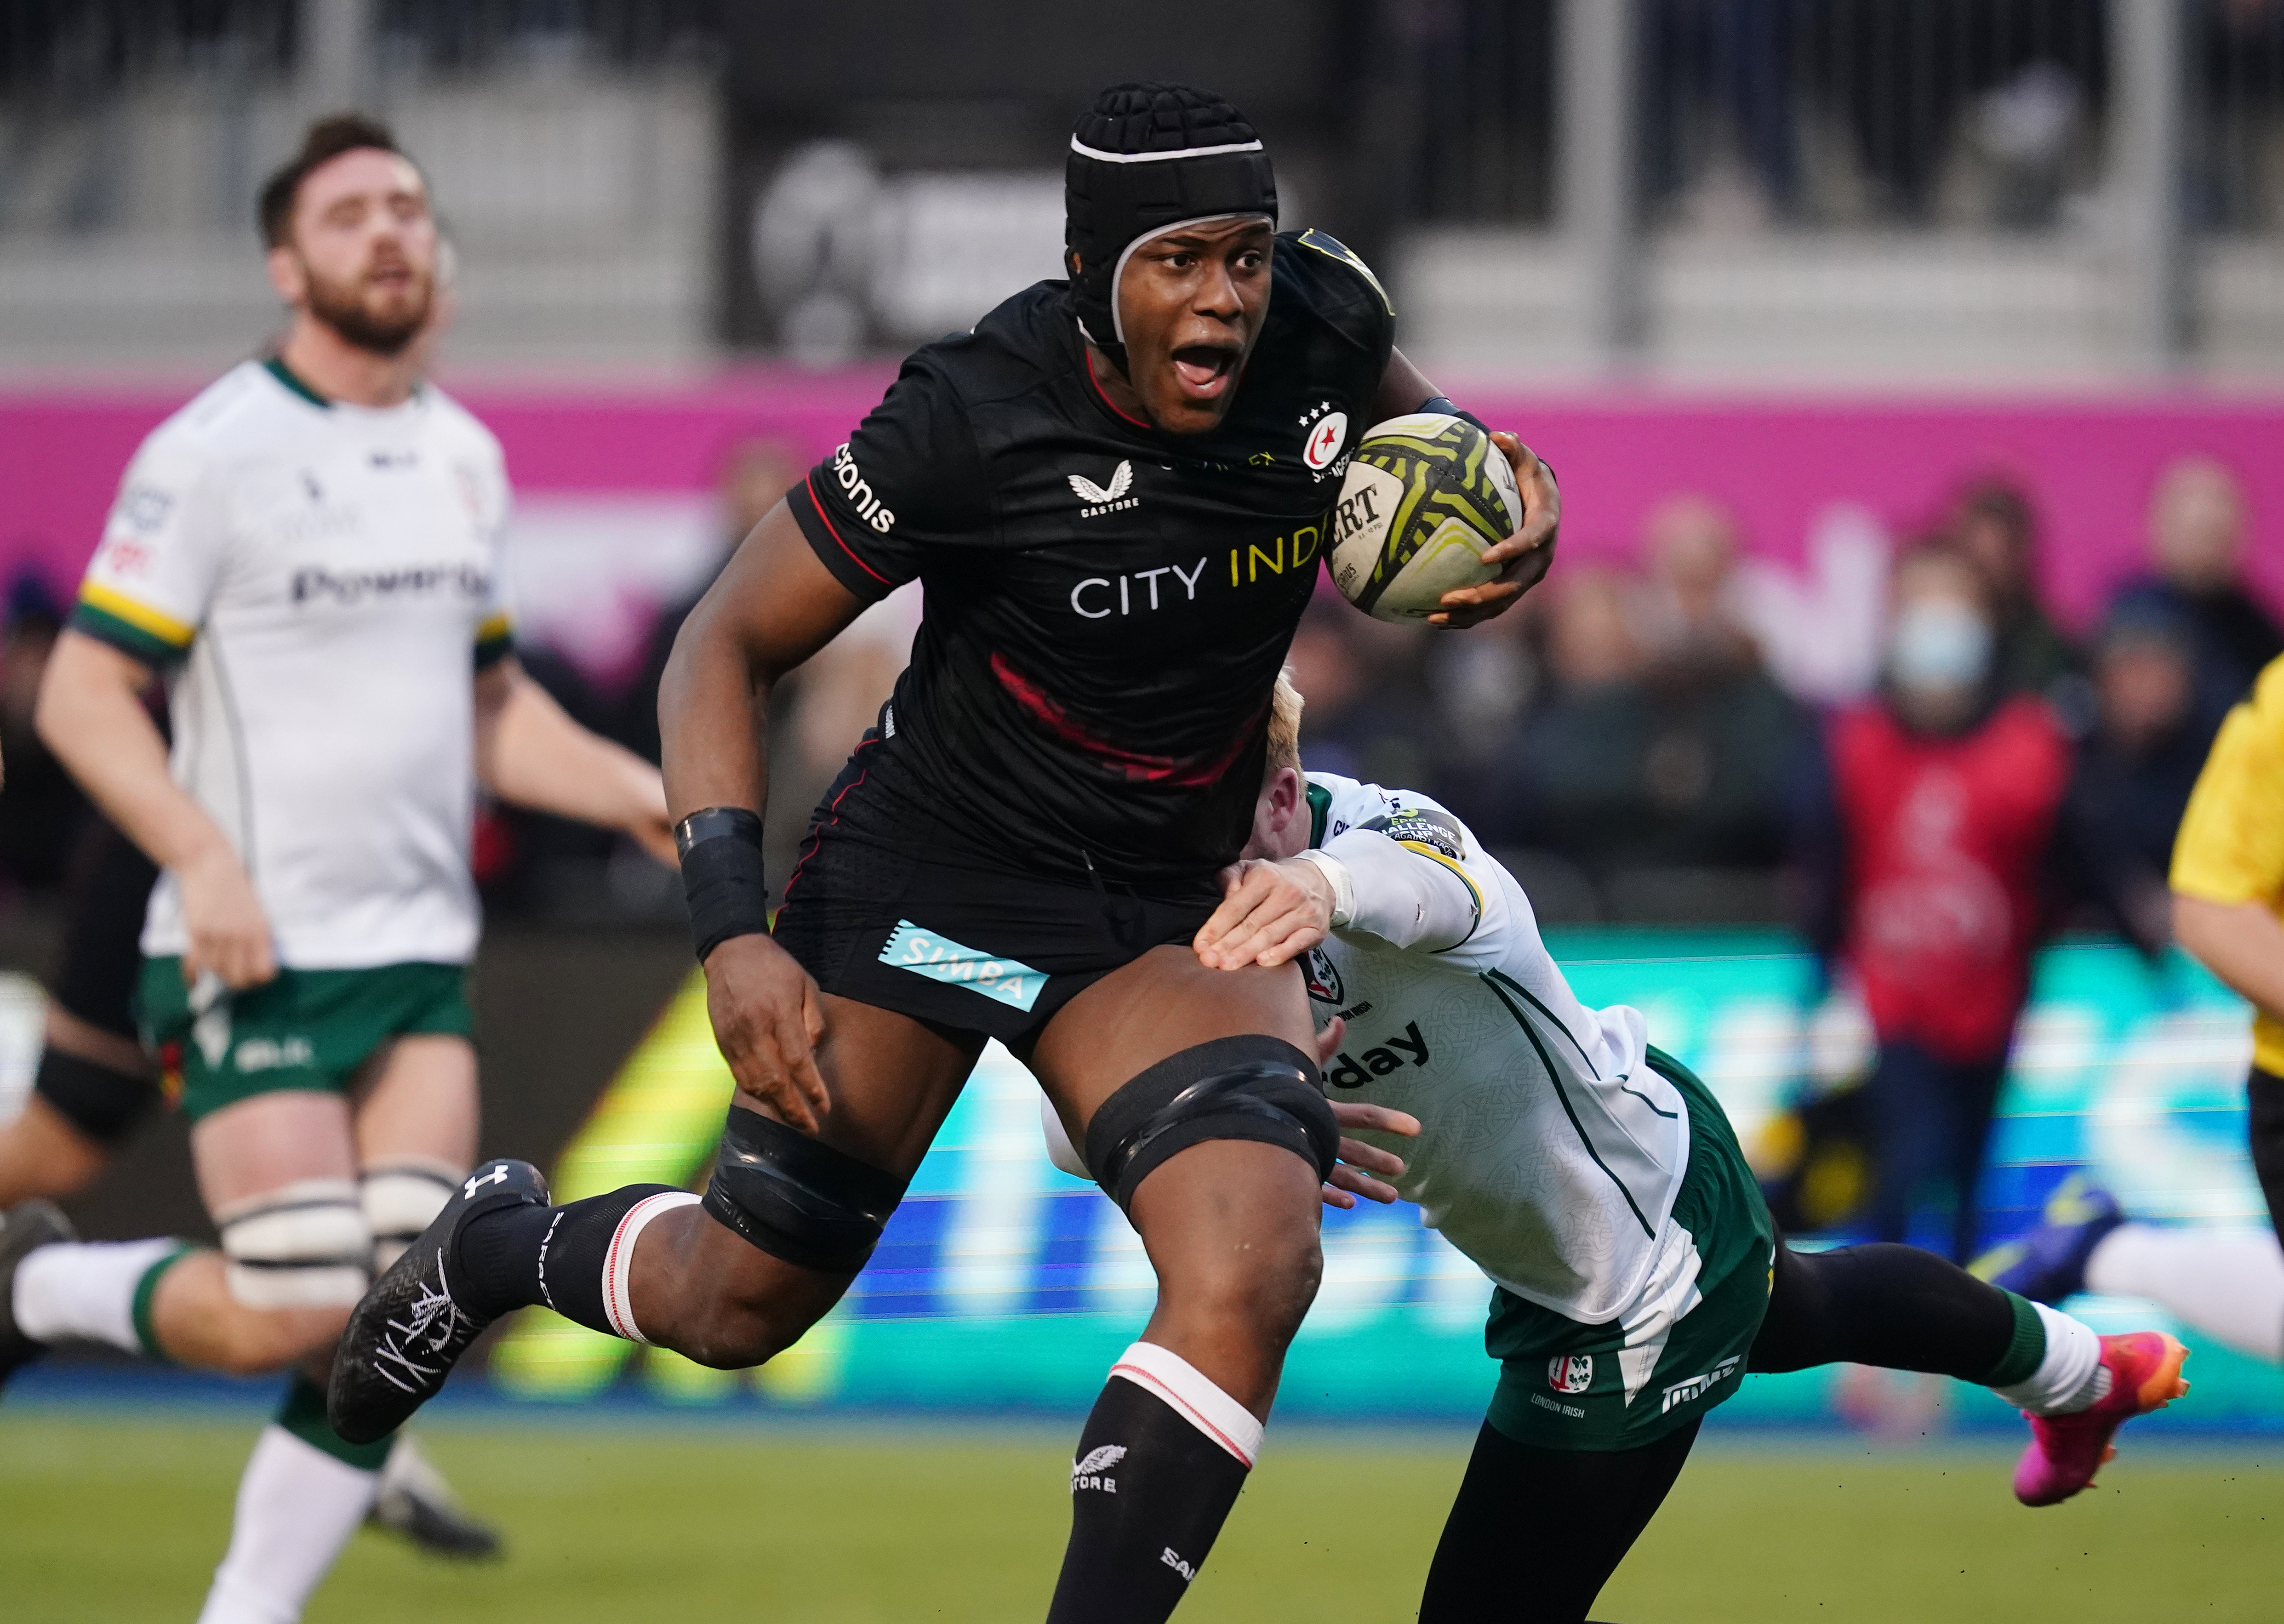 Maro itoje during the epcr challenge cup at the stonex stadium in january